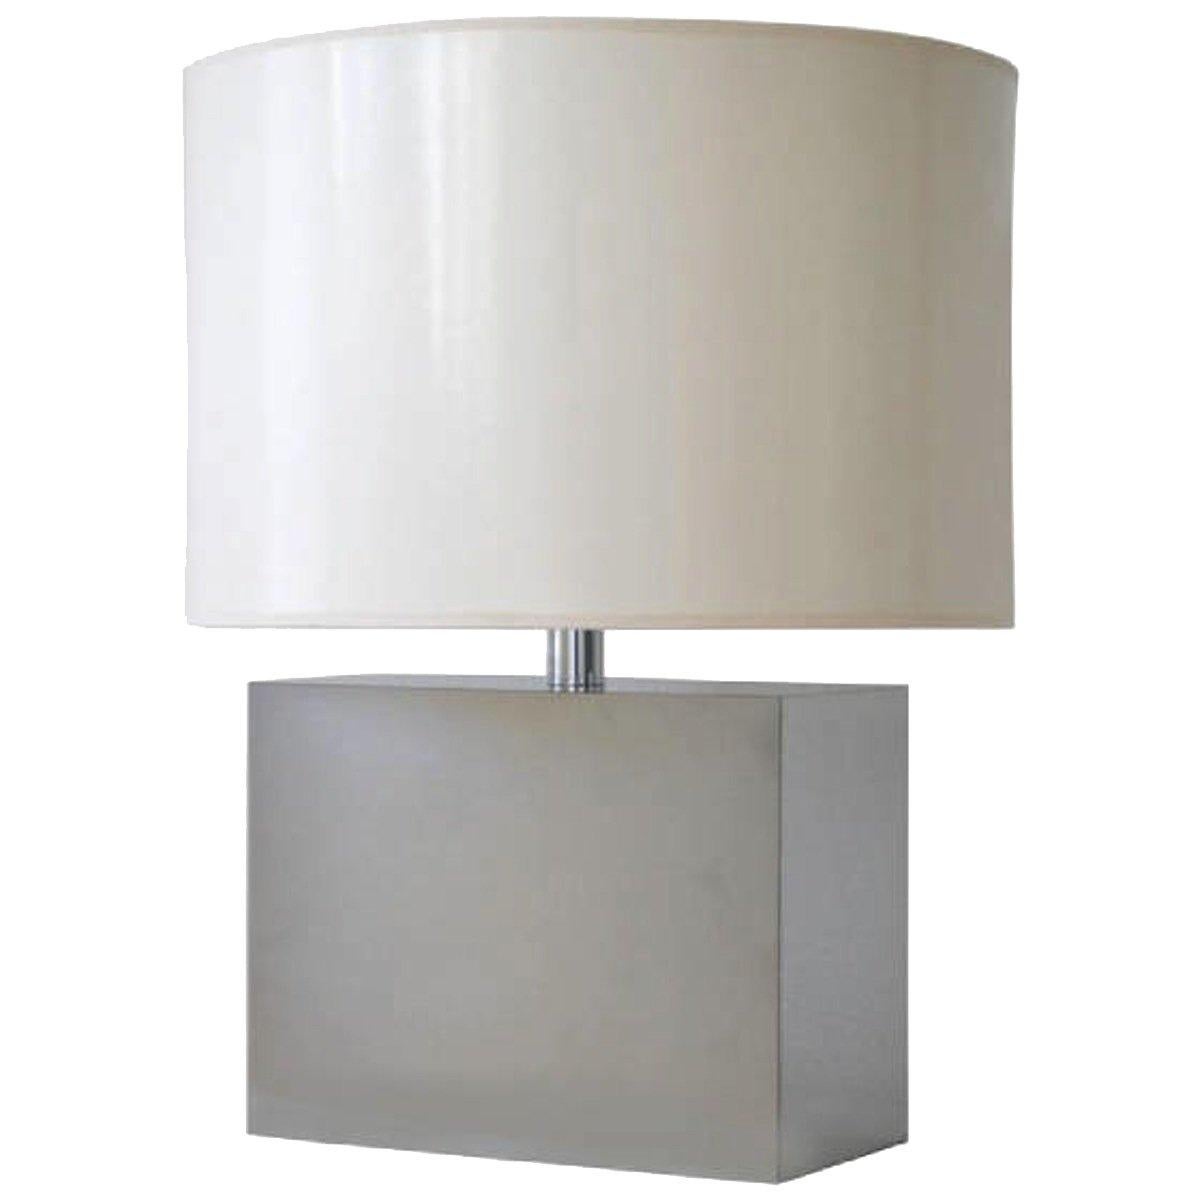 Midcentury Mirrored Chrome Rectangular Table Lamp by Kovacs For Sale